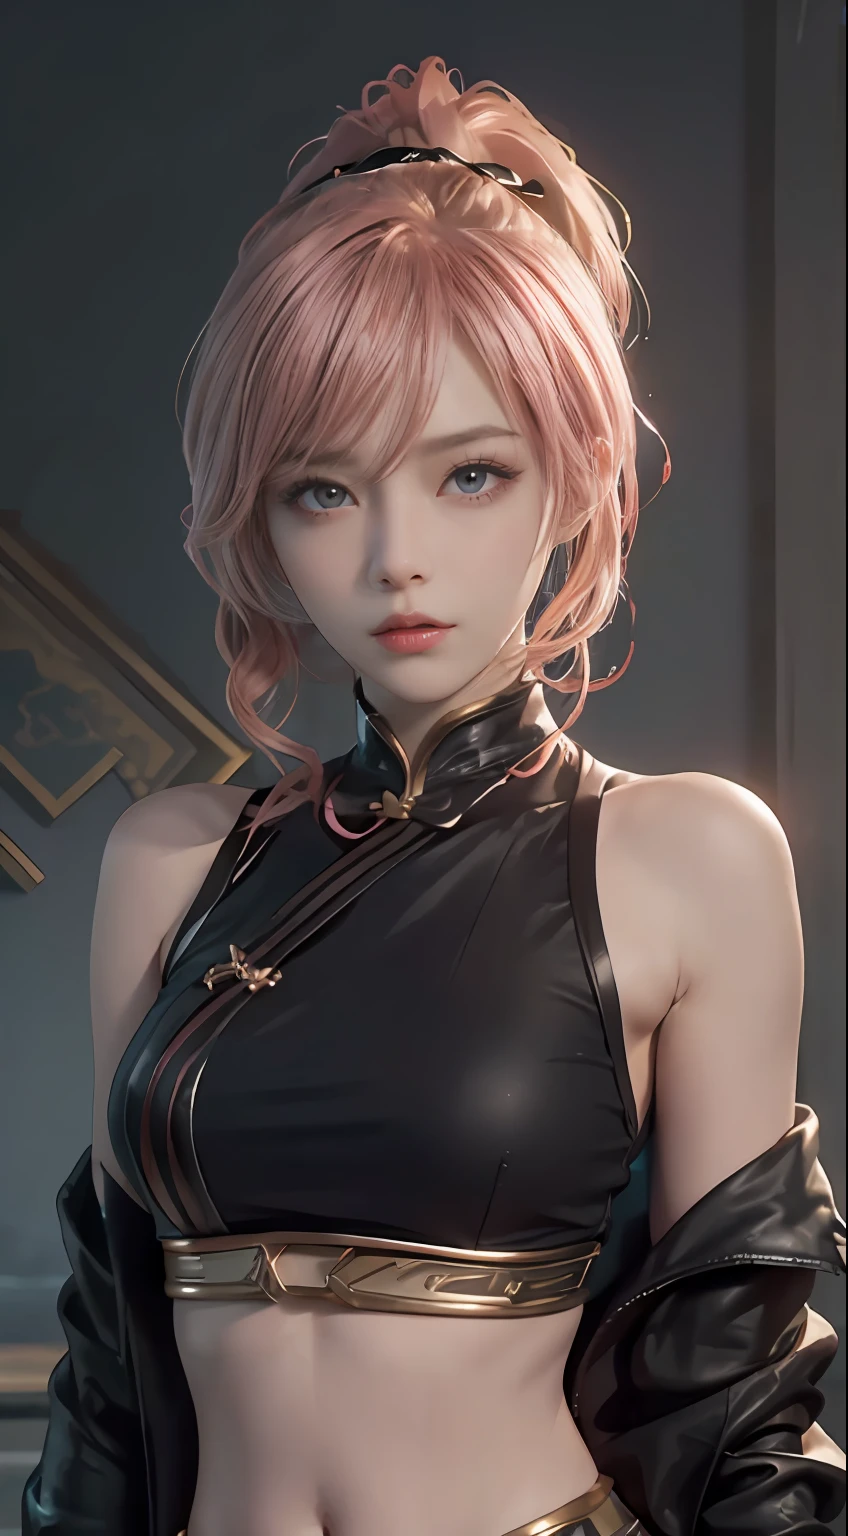 jixiaoman，Pink_Hair，black_clothes，((Realistic lighting, Top quality, 8K, Masterpiece: 1.3)), Clear focus: 1.2, 1 girl, Bigboobs,Perfect body beauty: 1.4, Slim abs: 1.1, Perfect face,beautfully face